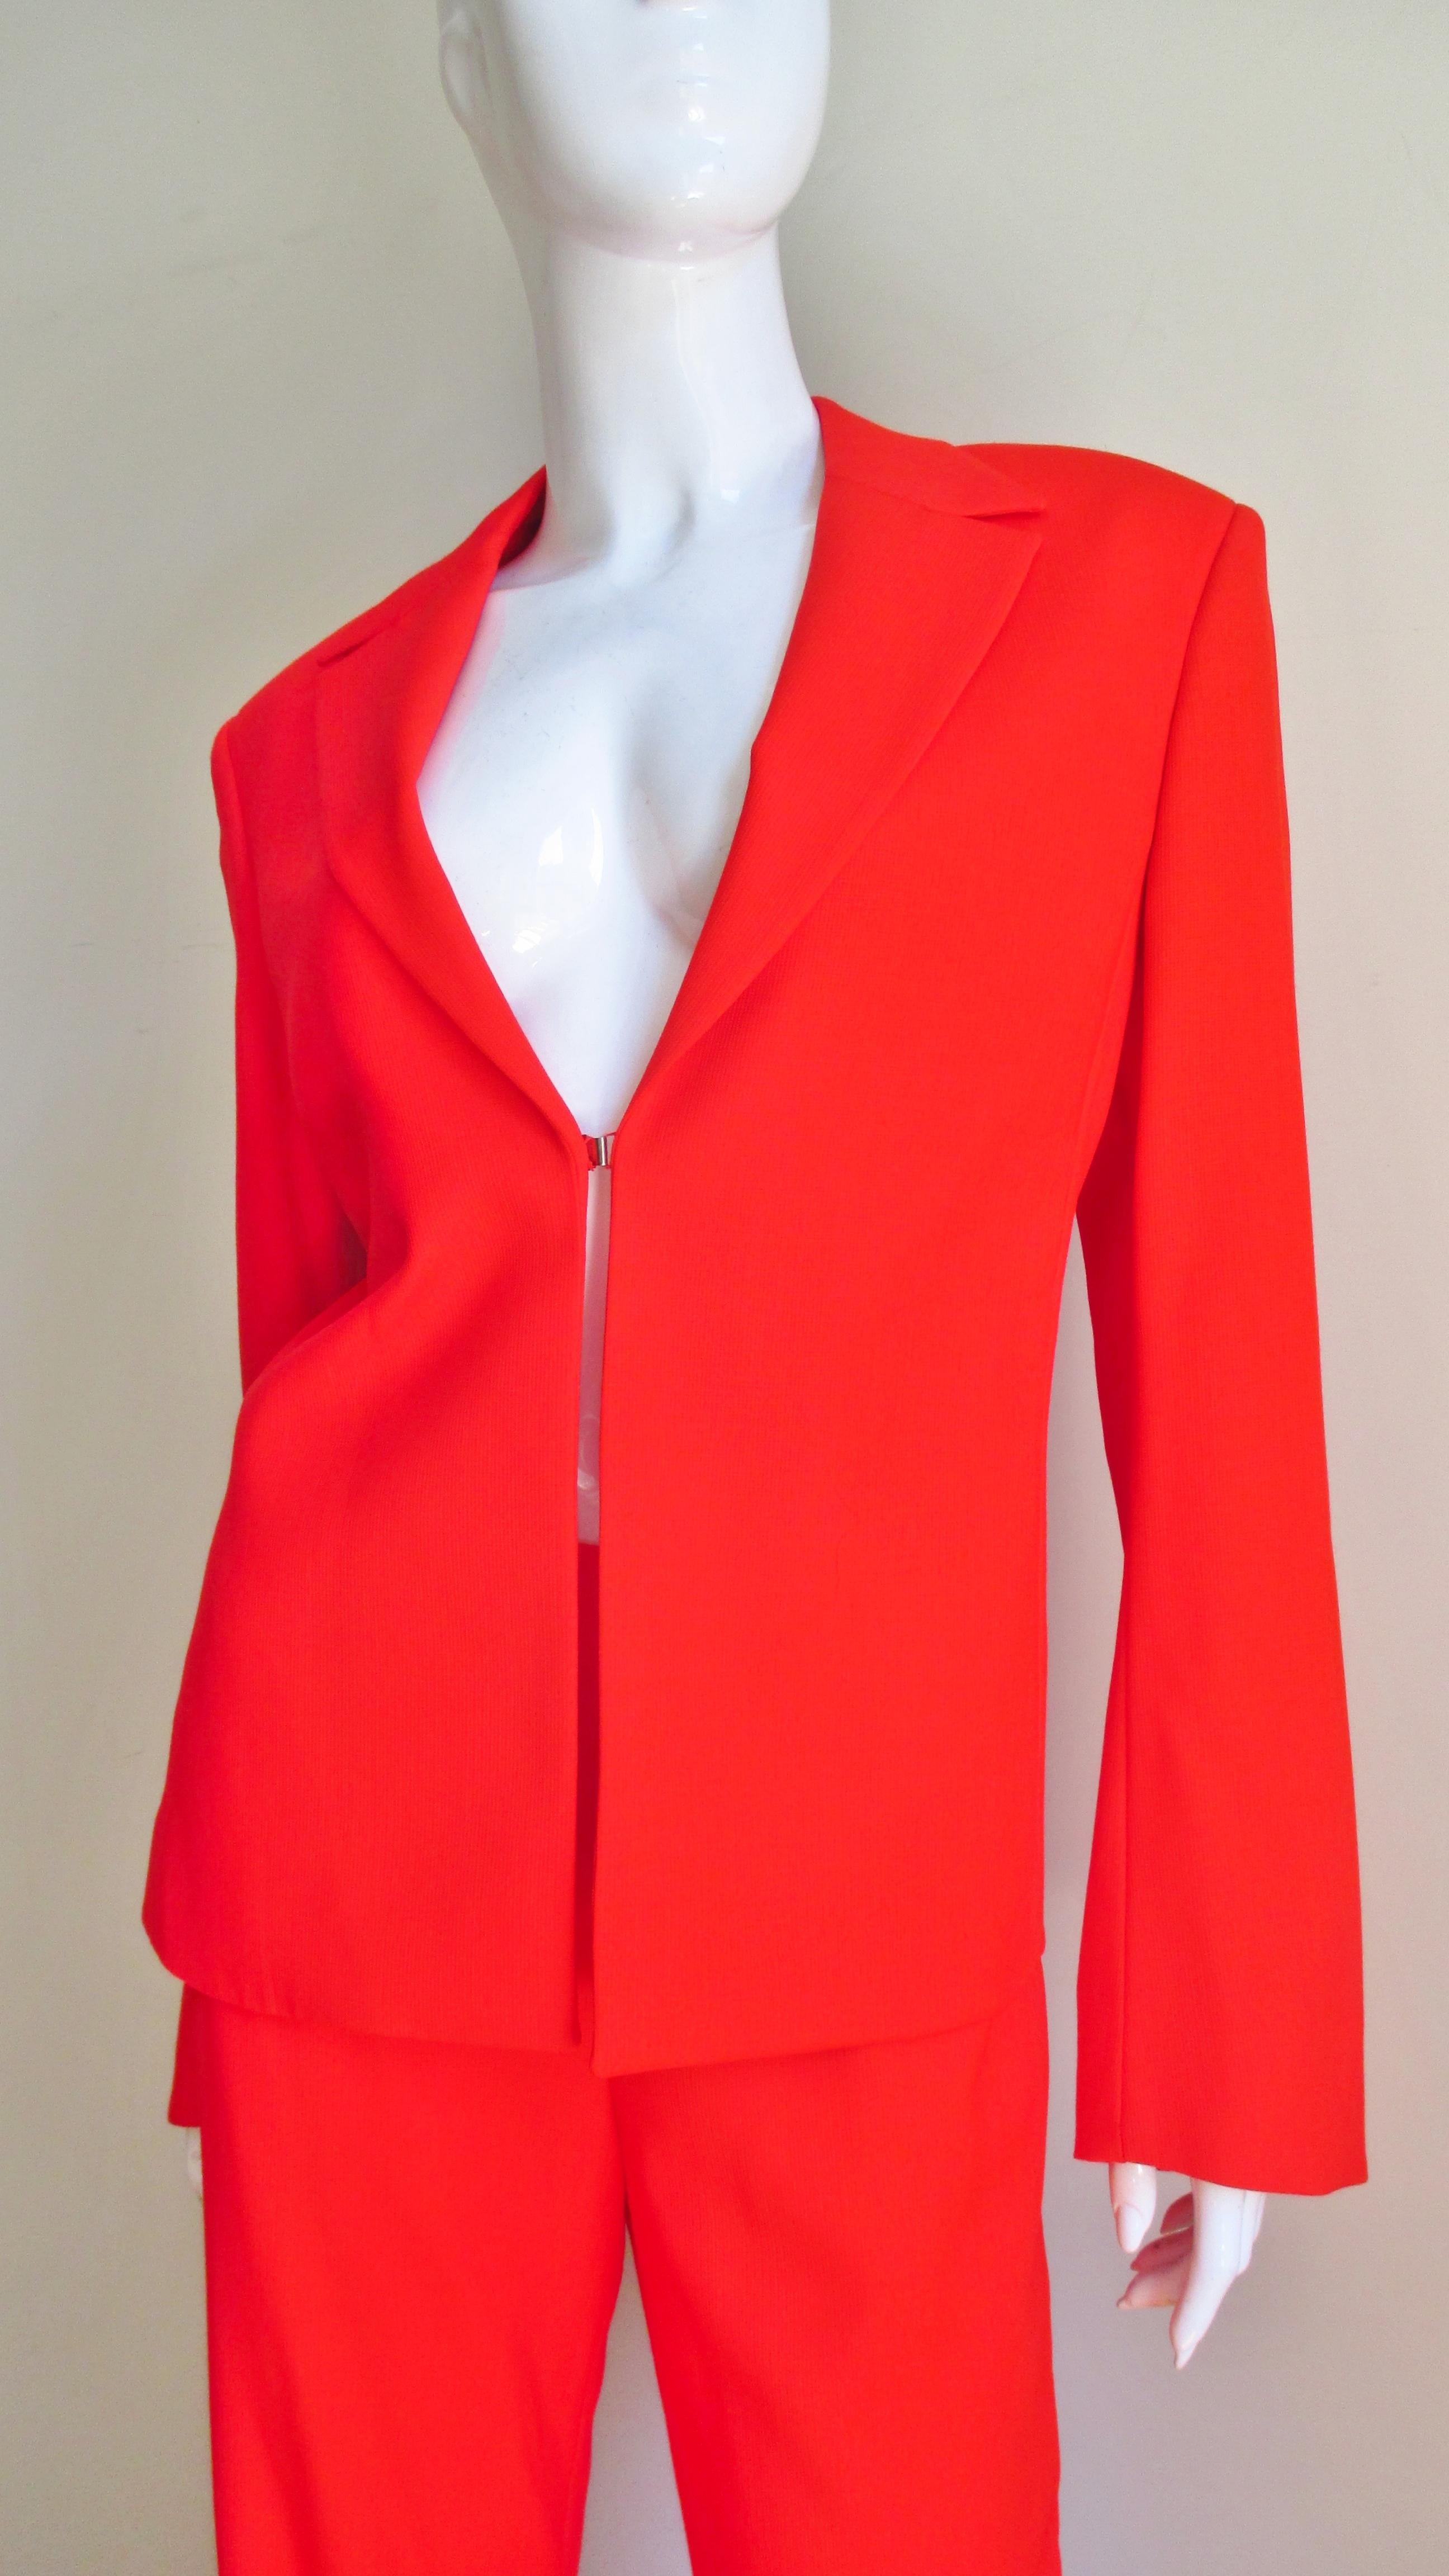 A gorgeous orange light weight wool pant suit from Gianni Versace Couture.  The lapel jacket has a front hook closure and lightly padded shoulders.  The straight leg mid rise pants have 2 narrow curved nude mesh covered cut outs at each side upper